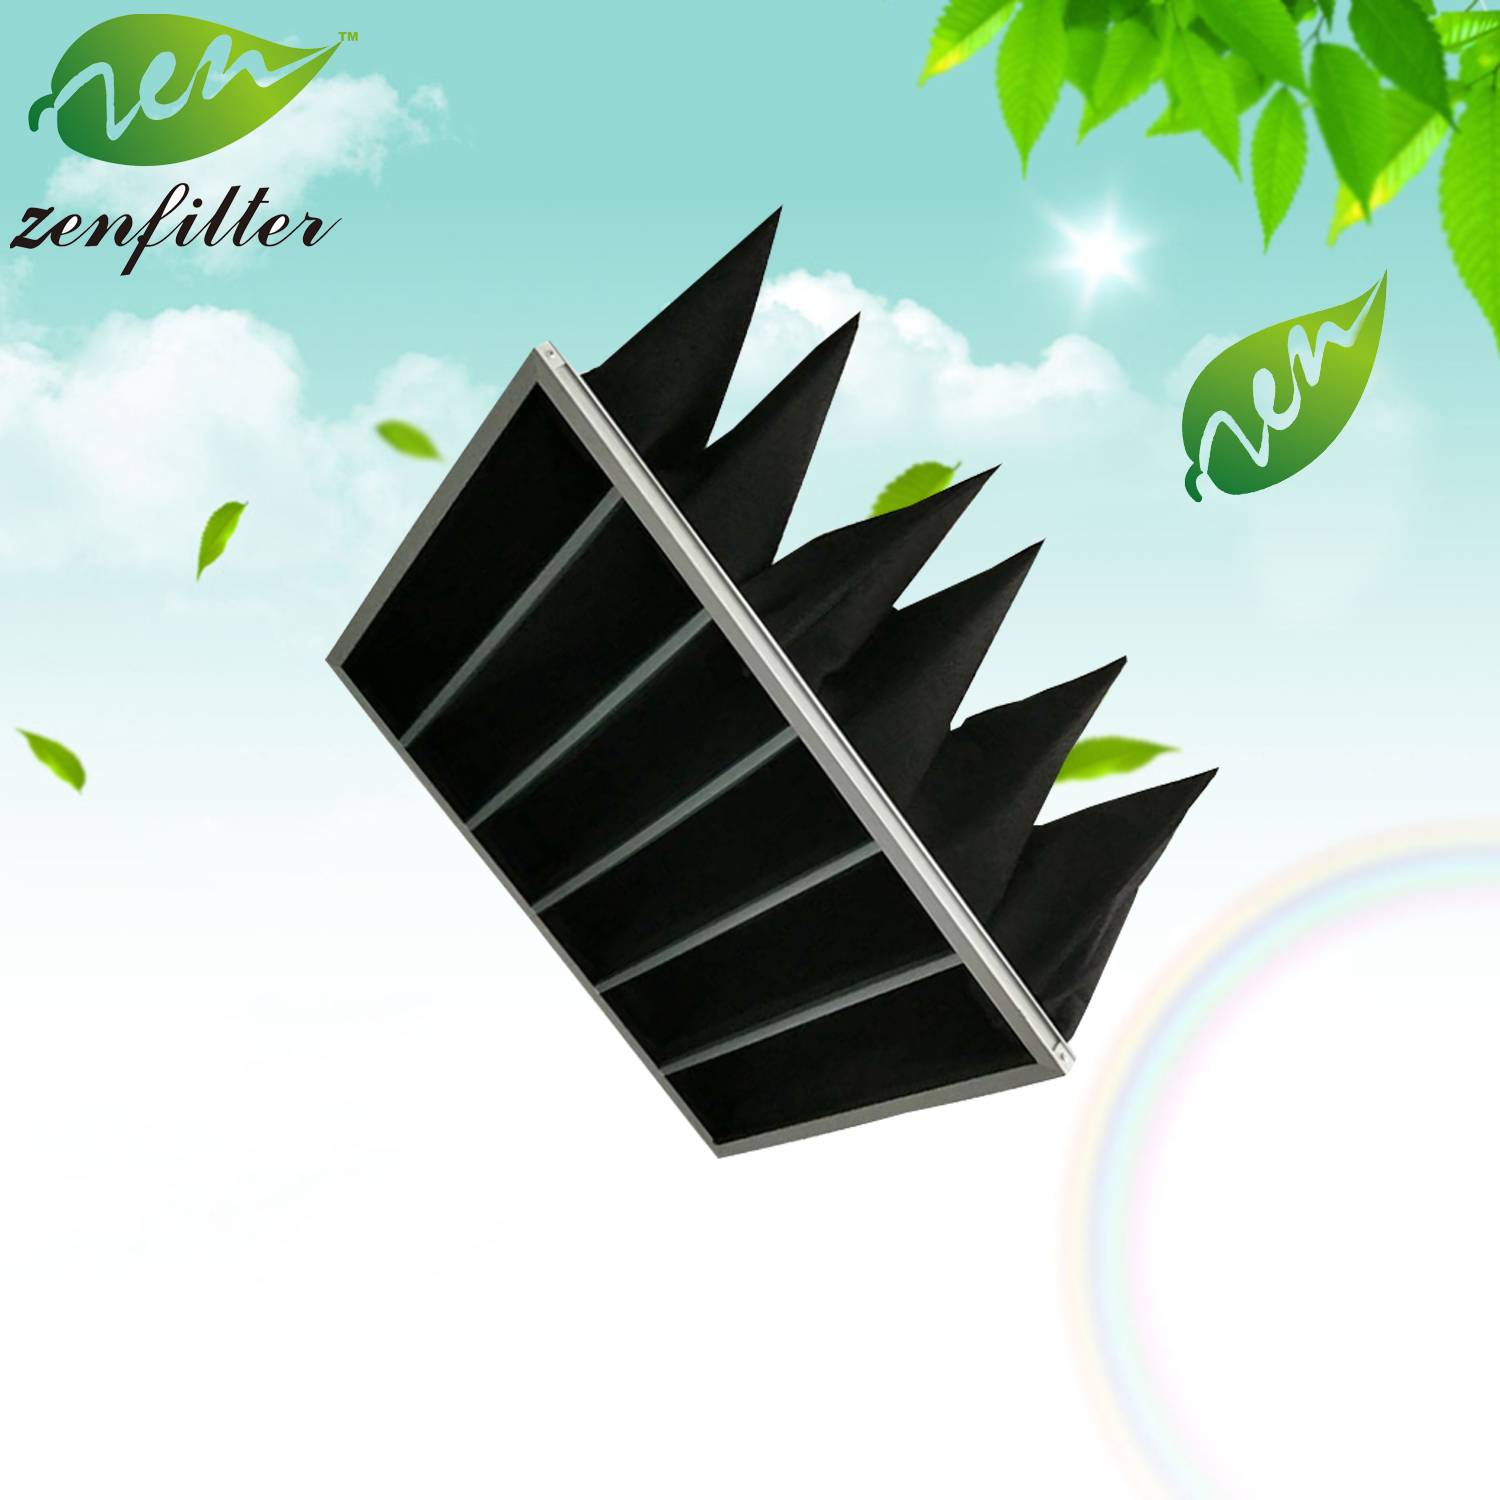 Activated Carbon Pocket(bag) Filter Featured Image